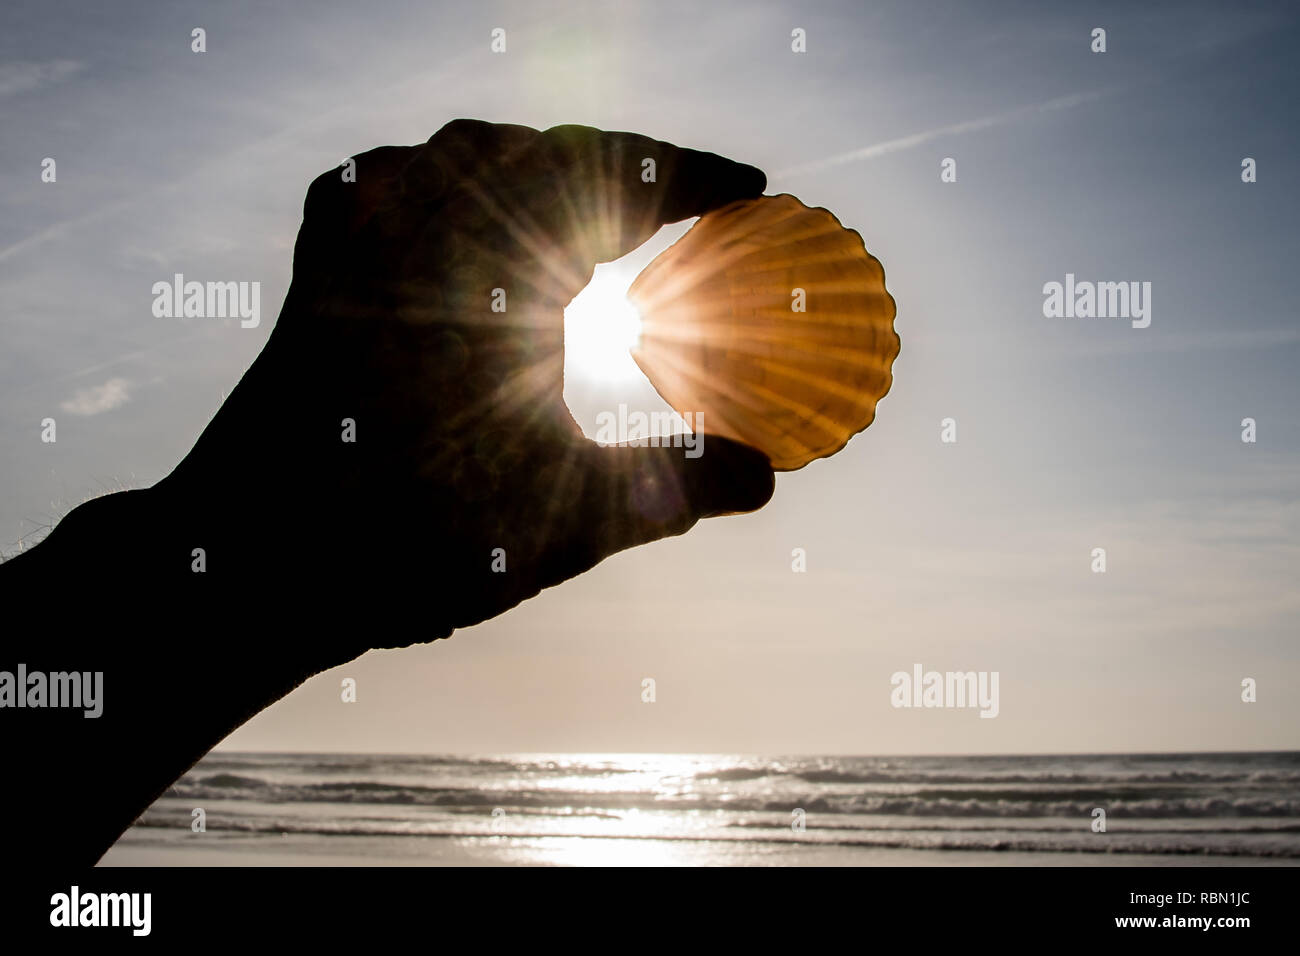 sun-flooded pilgrims mussel held in a hand with sun star coming through Stock Photo